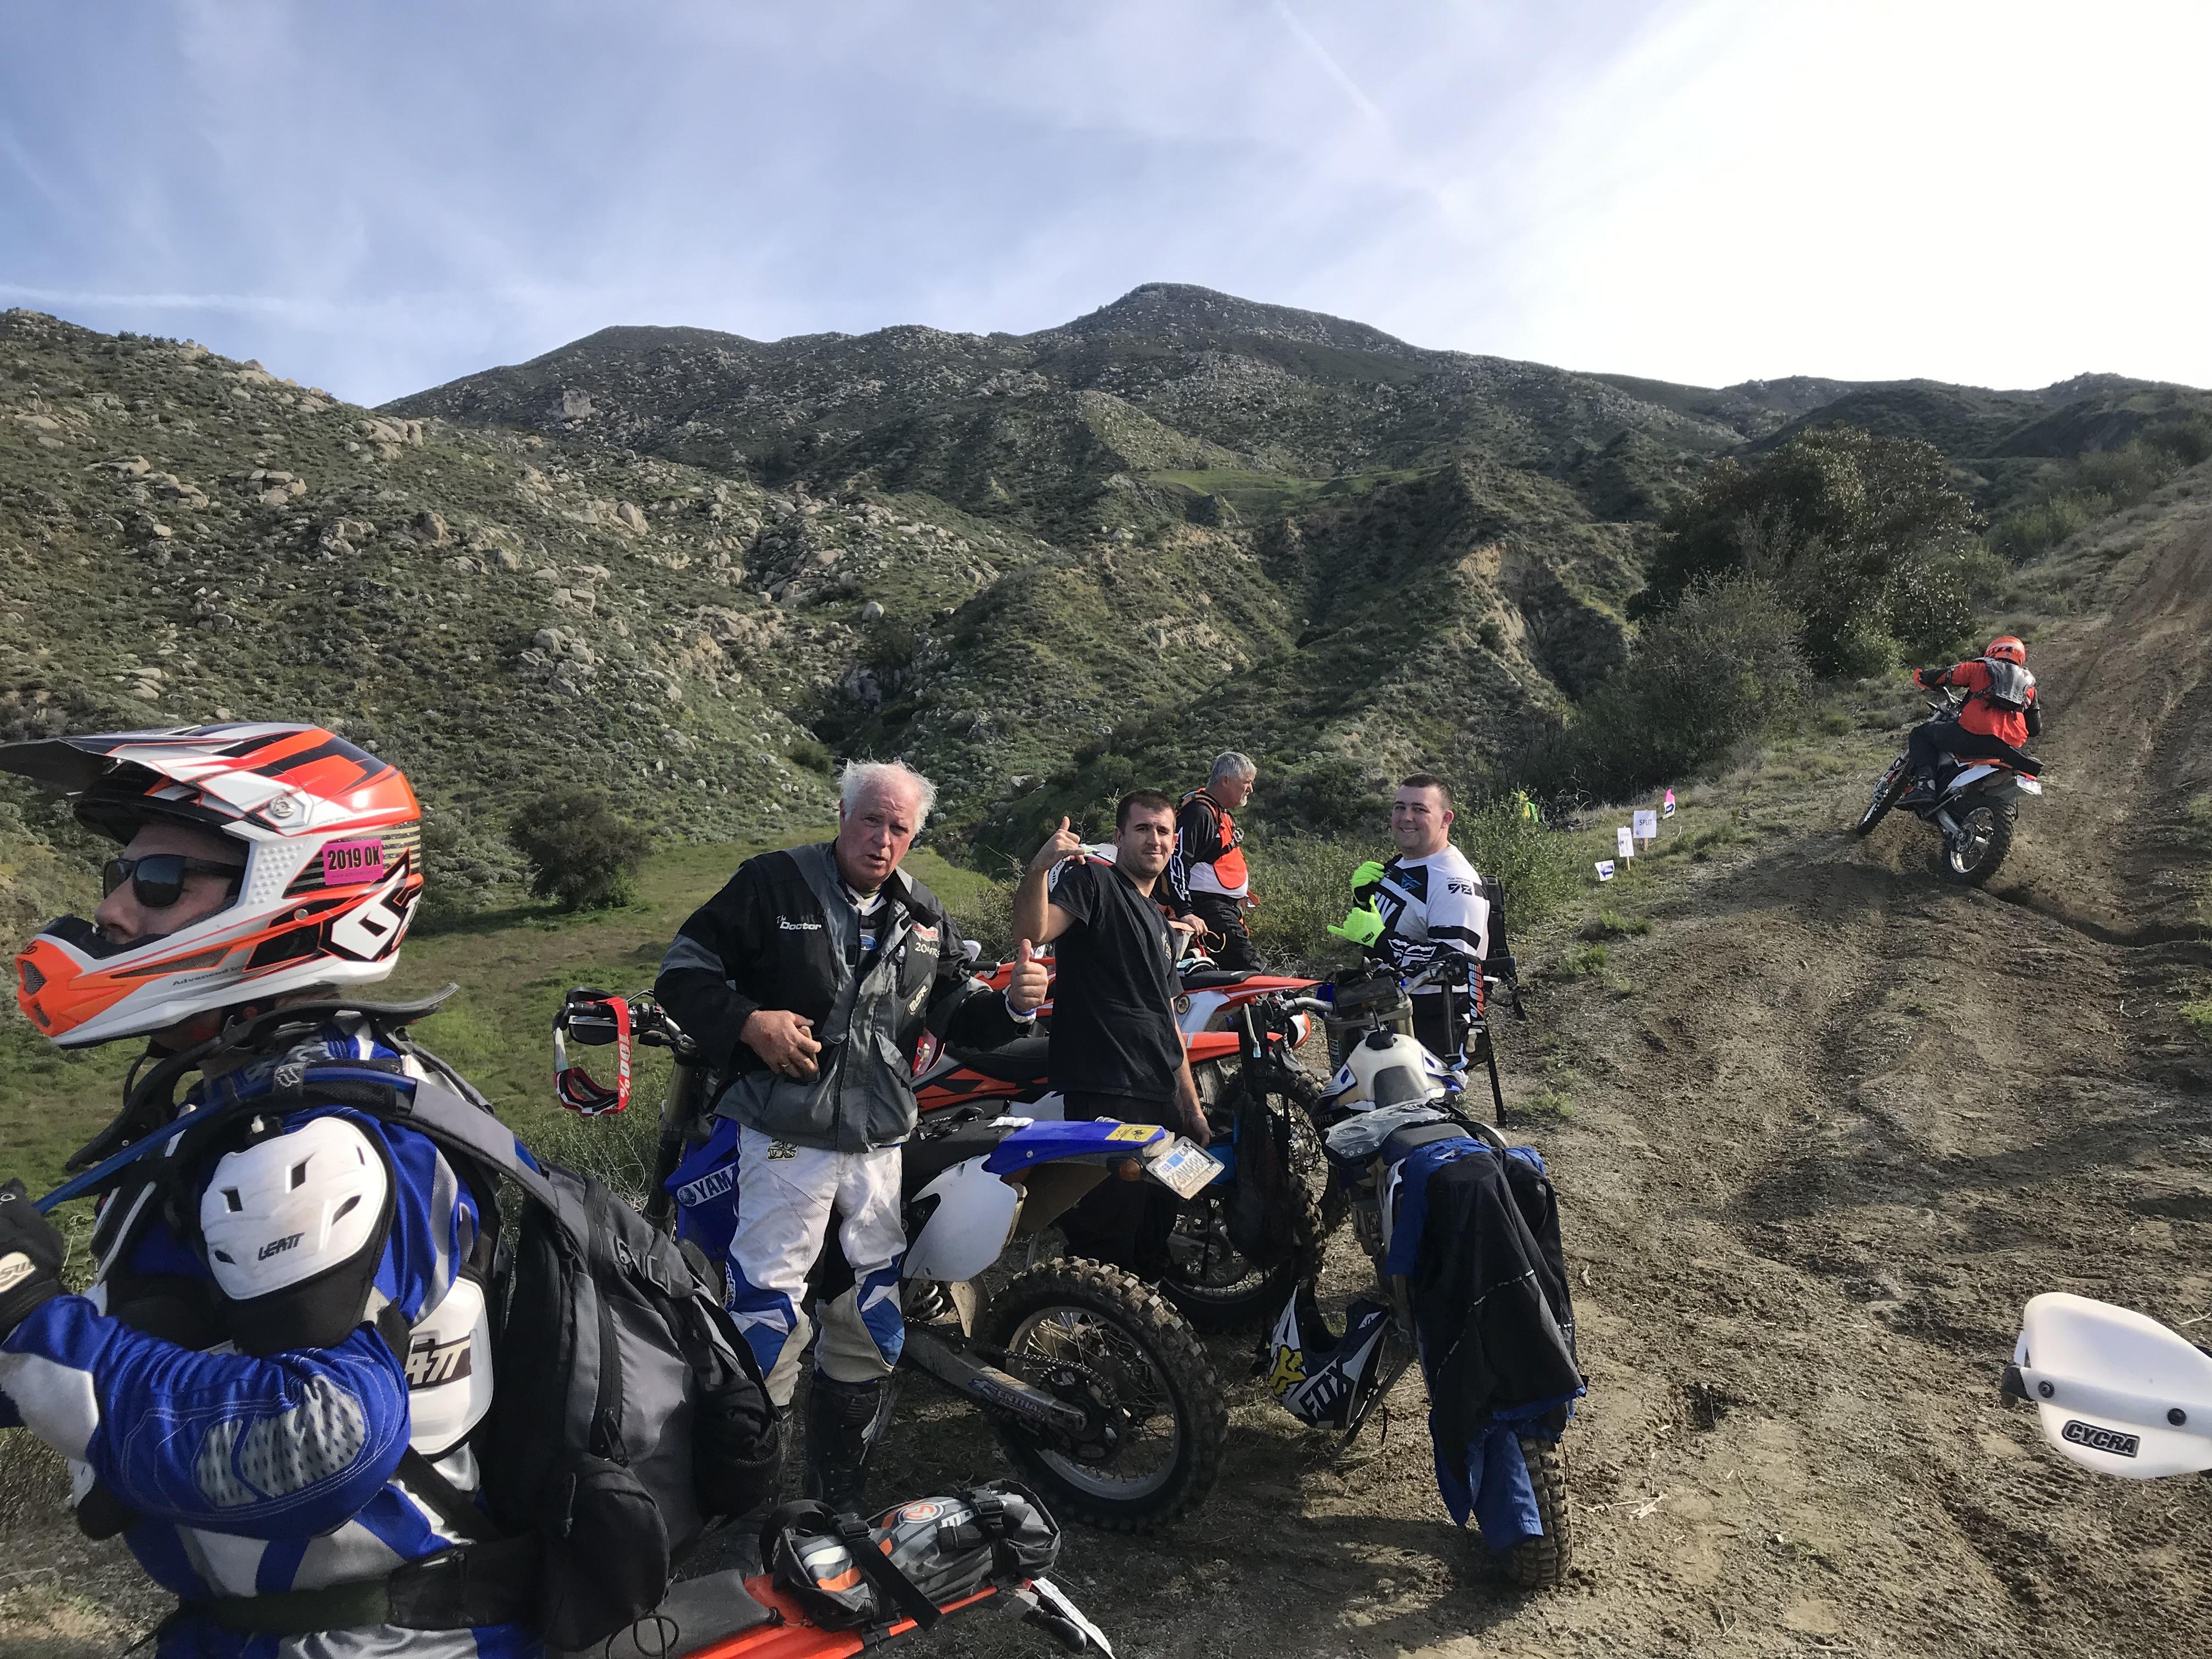 Soboba Trail Ride Organized or Promoted Rides and Events